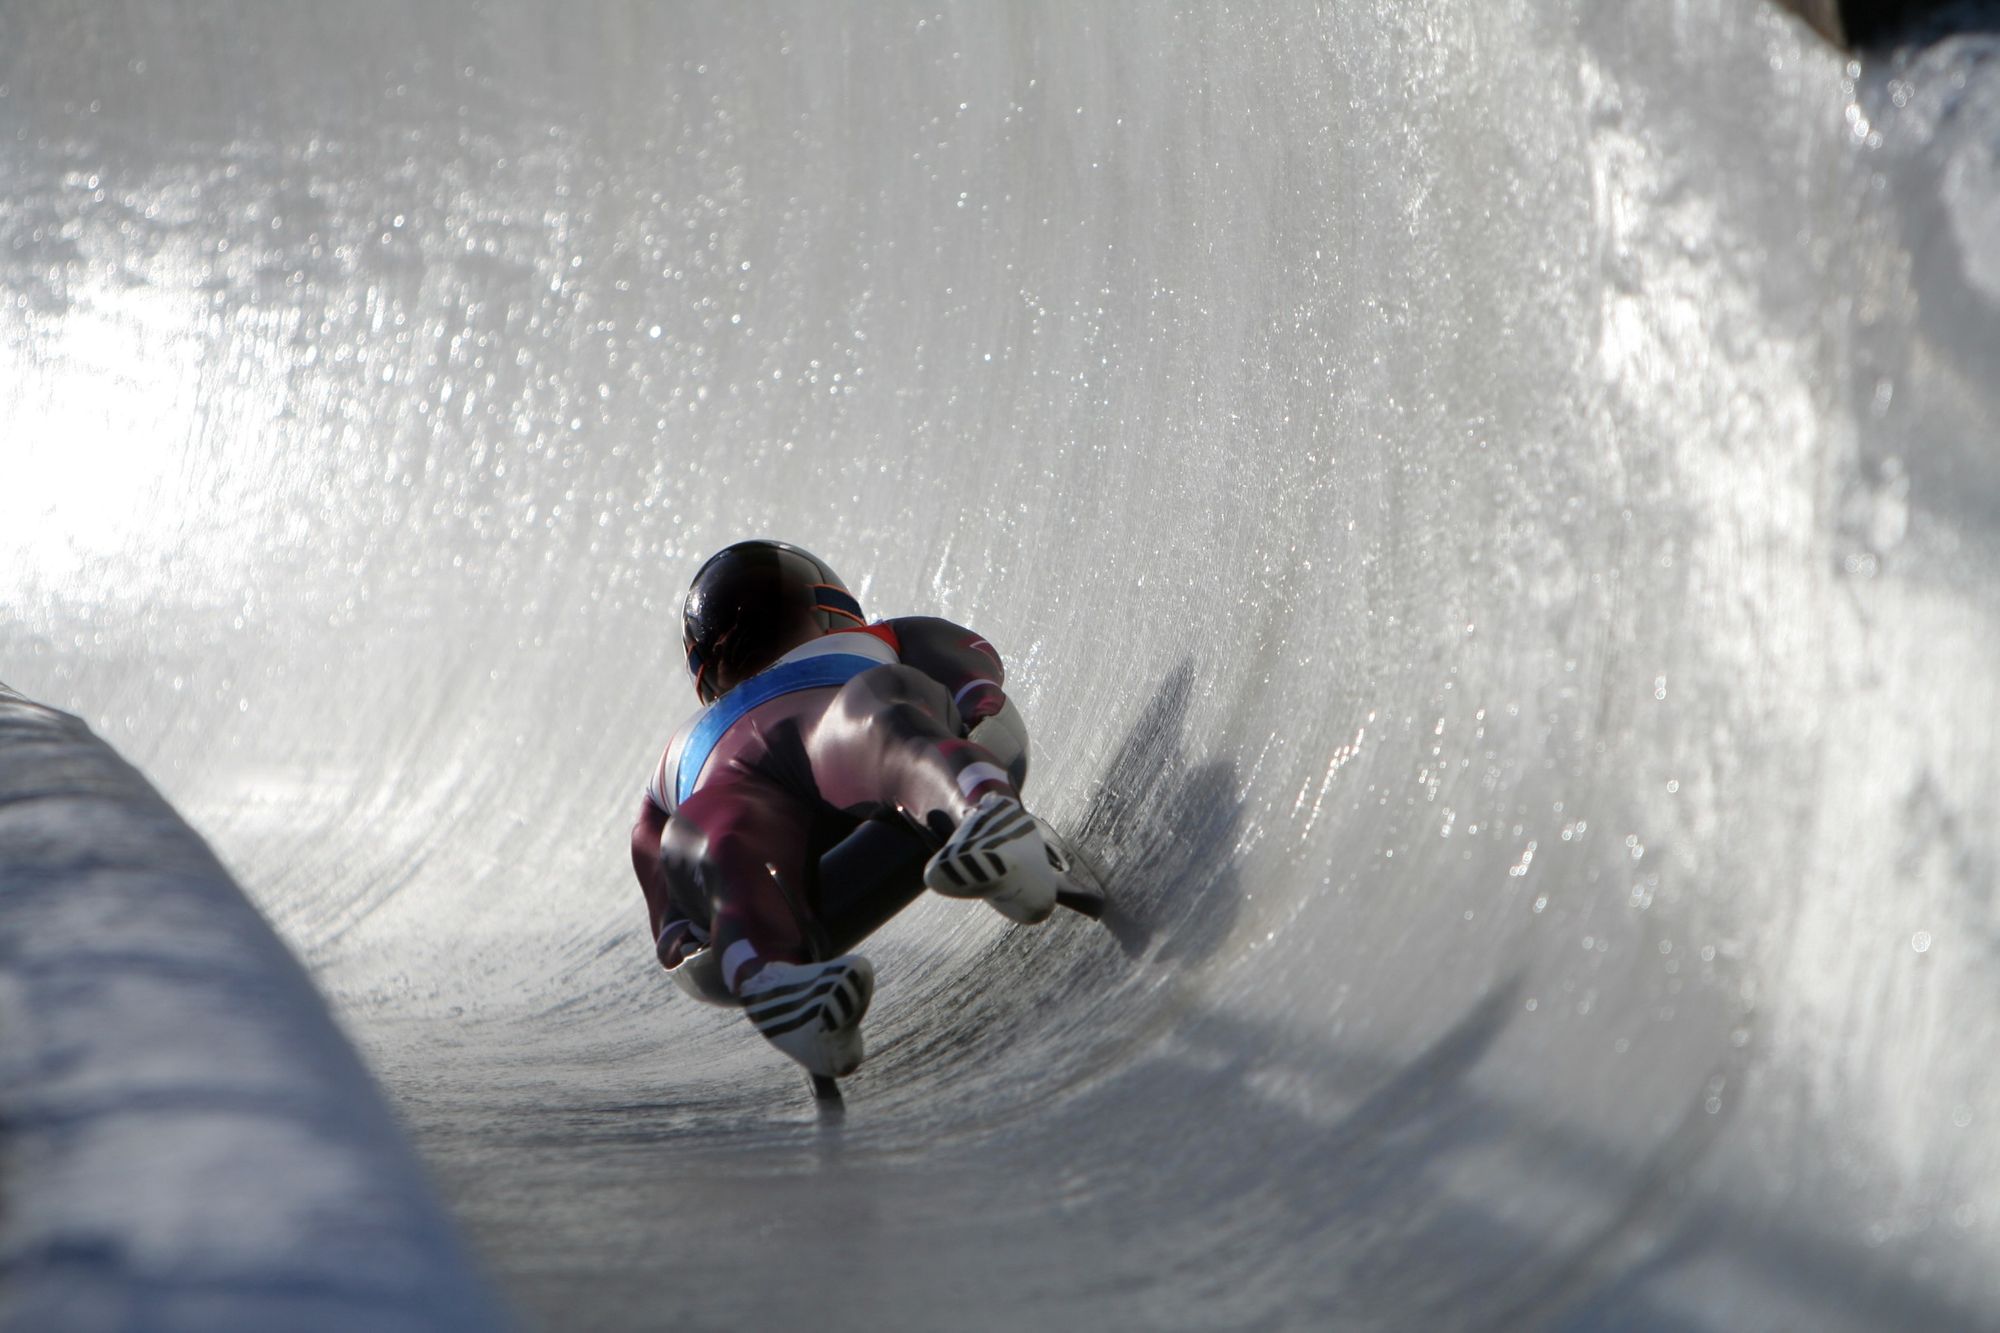 Calling all Luge Fans!